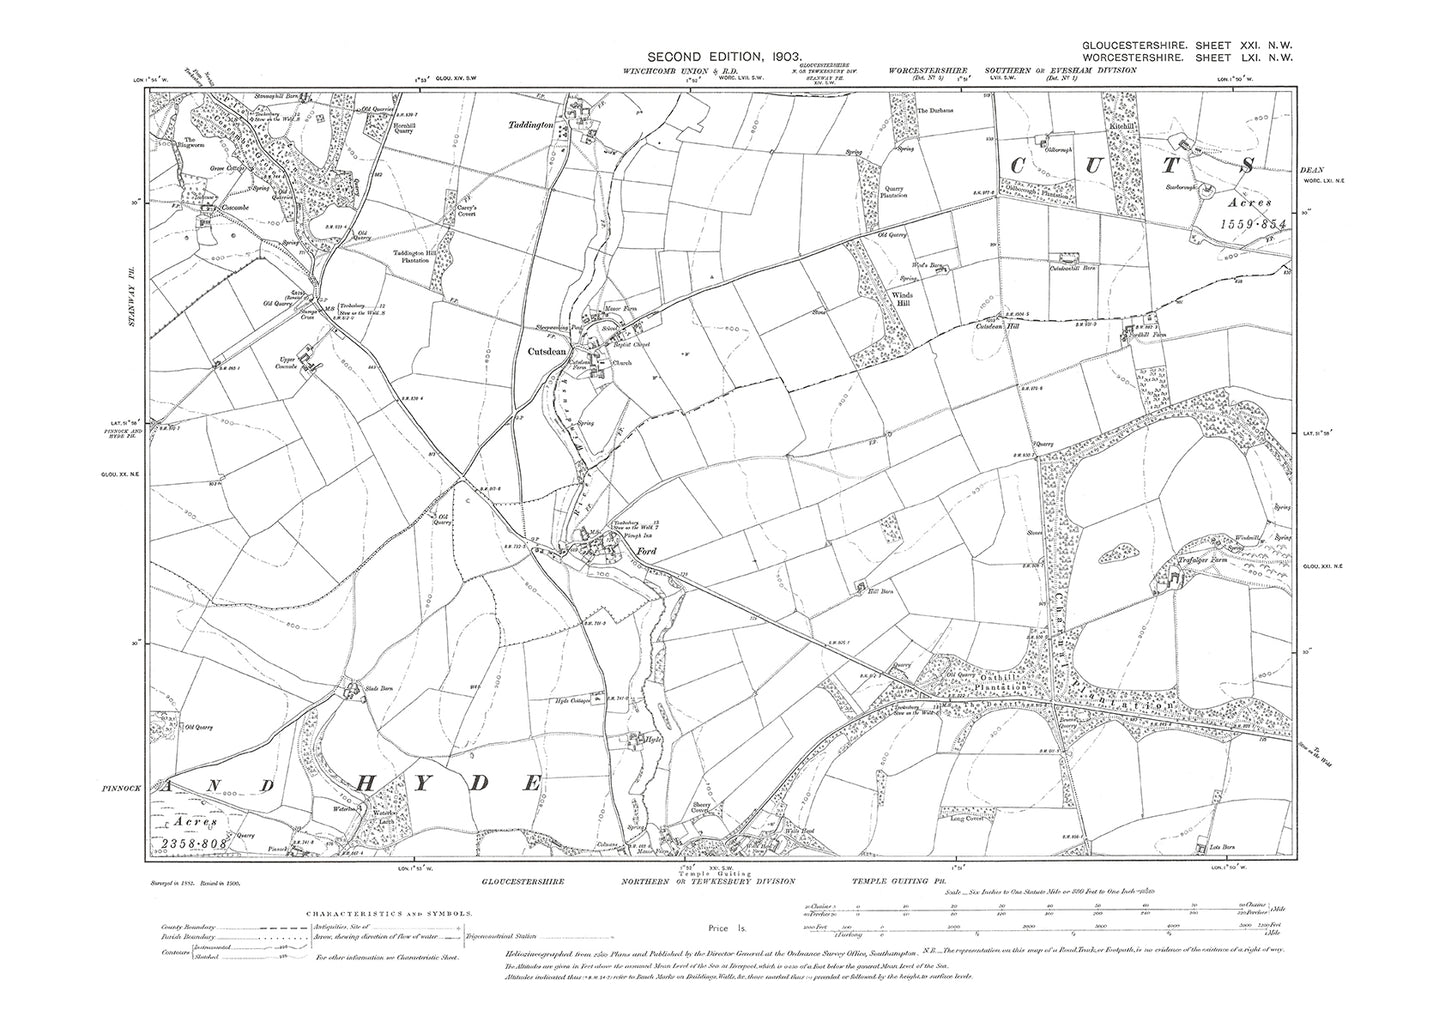 Old OS map dated 1903, showing Cutsdean, Ford, Temple Guiting (north) in Gloucestershire - 21NW